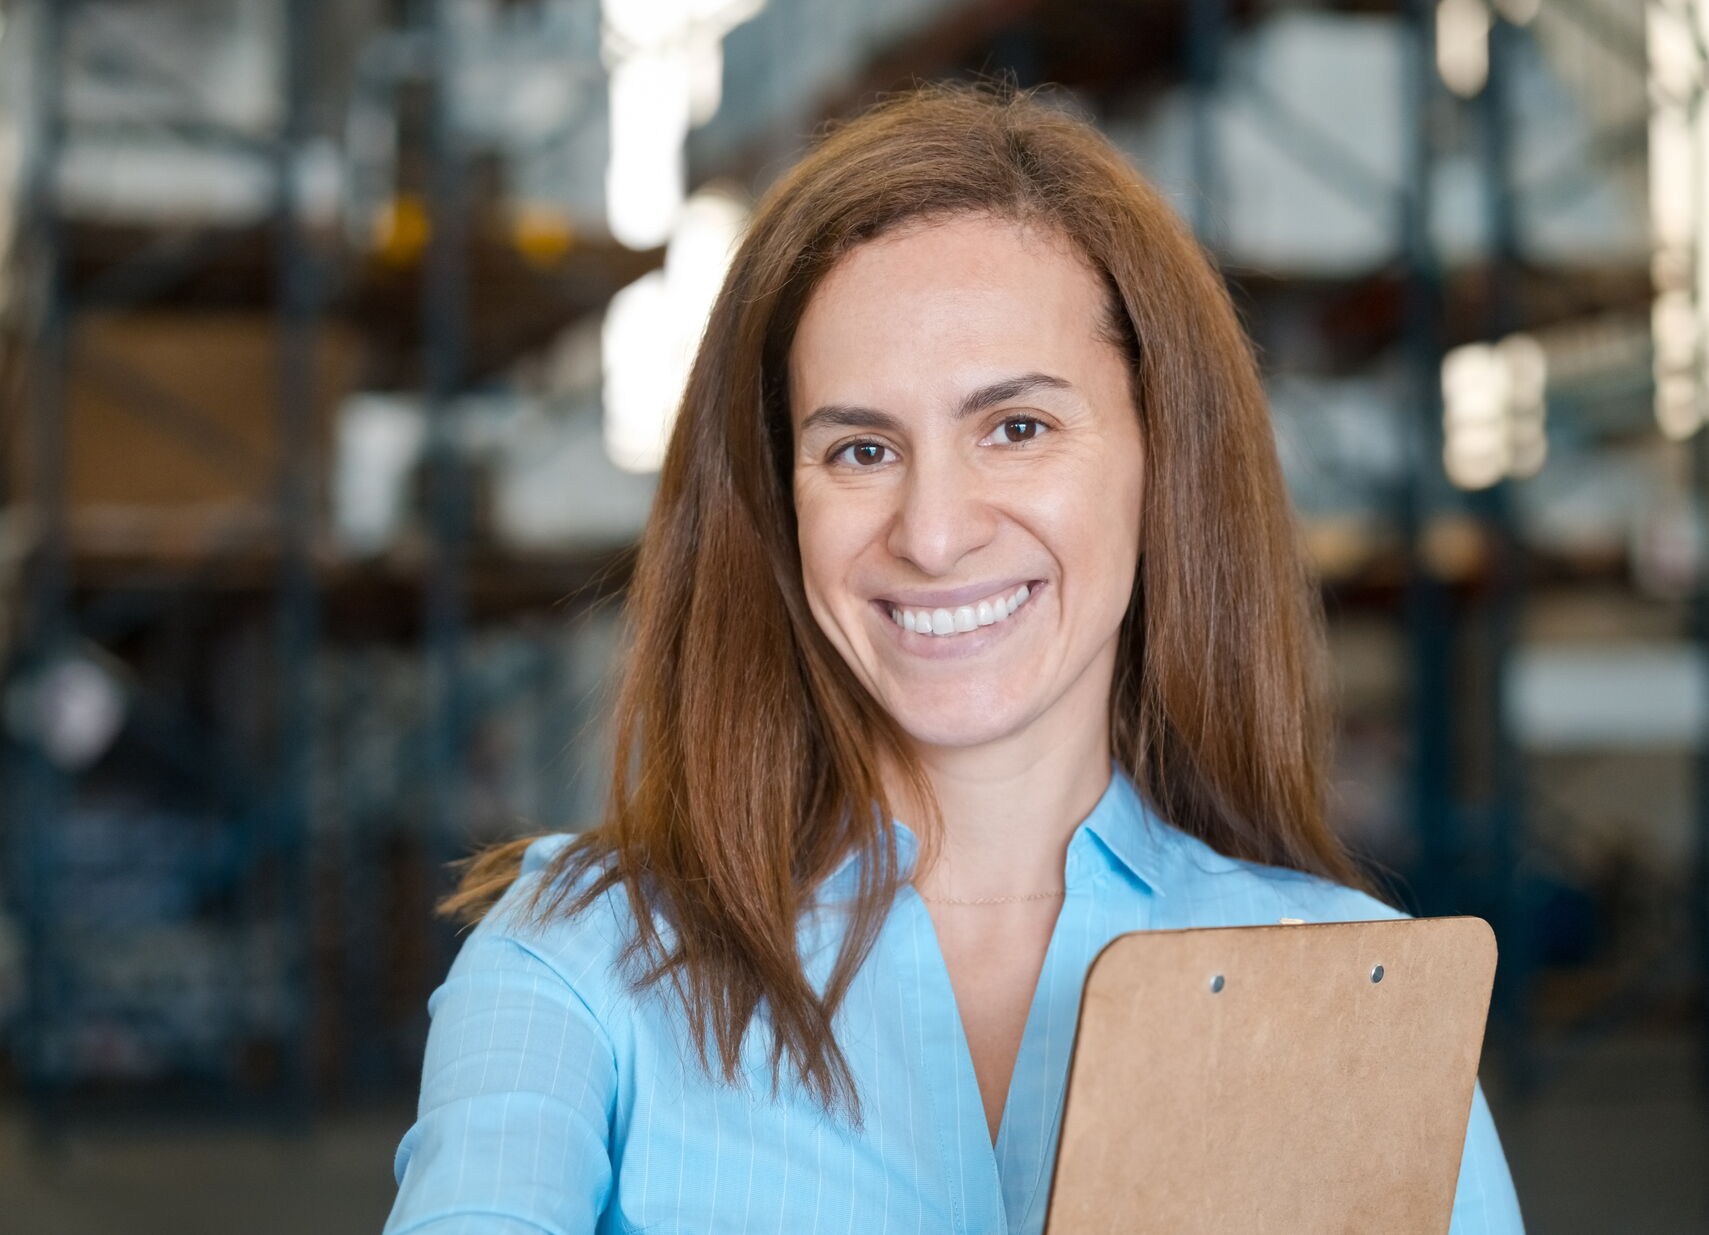 A woman holding a clipboard and smiling